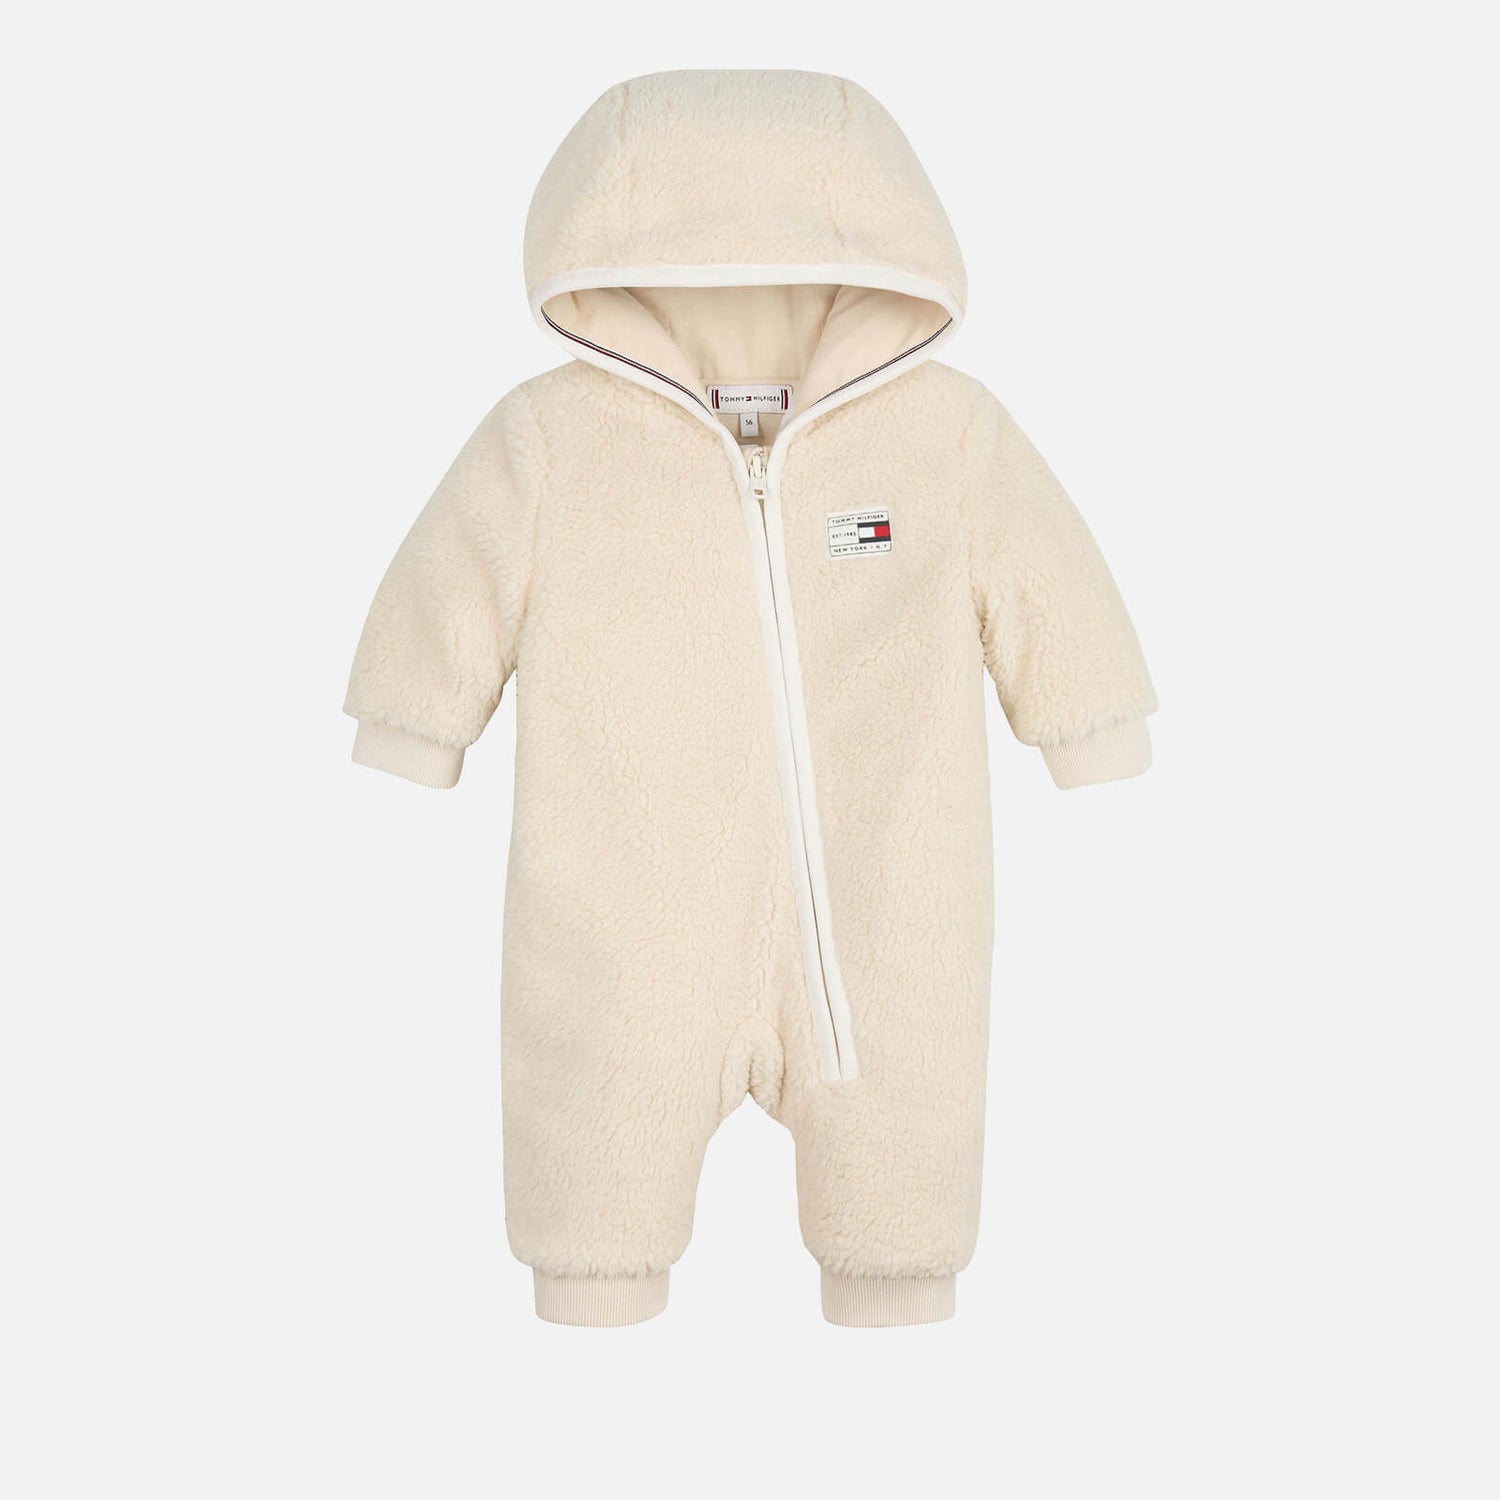 Tommy Hilfiger Babys' Sherpa Coverall - Ancient White - 3 Months